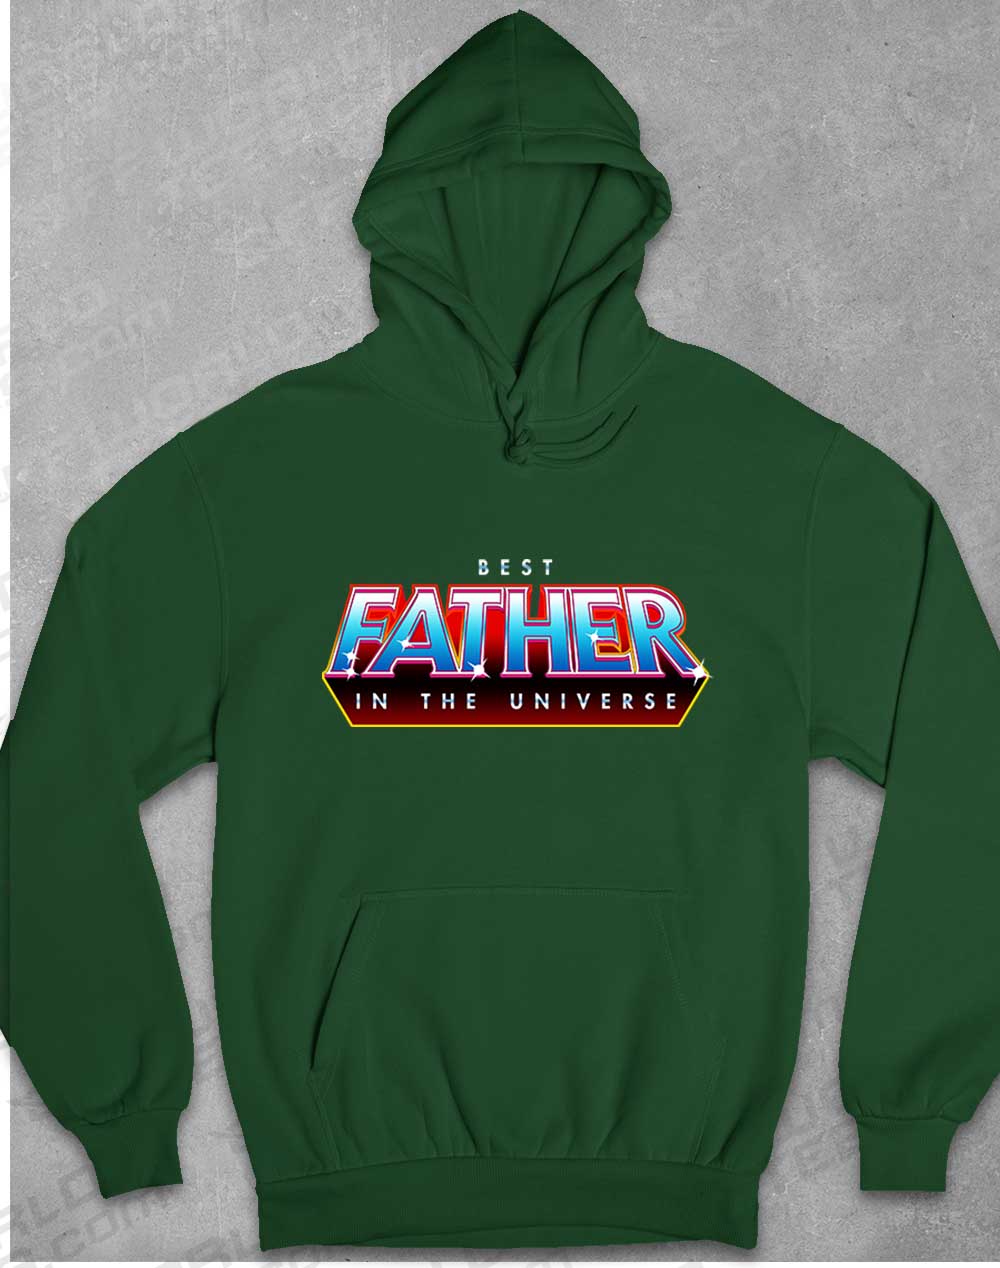 Bottle Green - Best Father in the Universe Hoodie